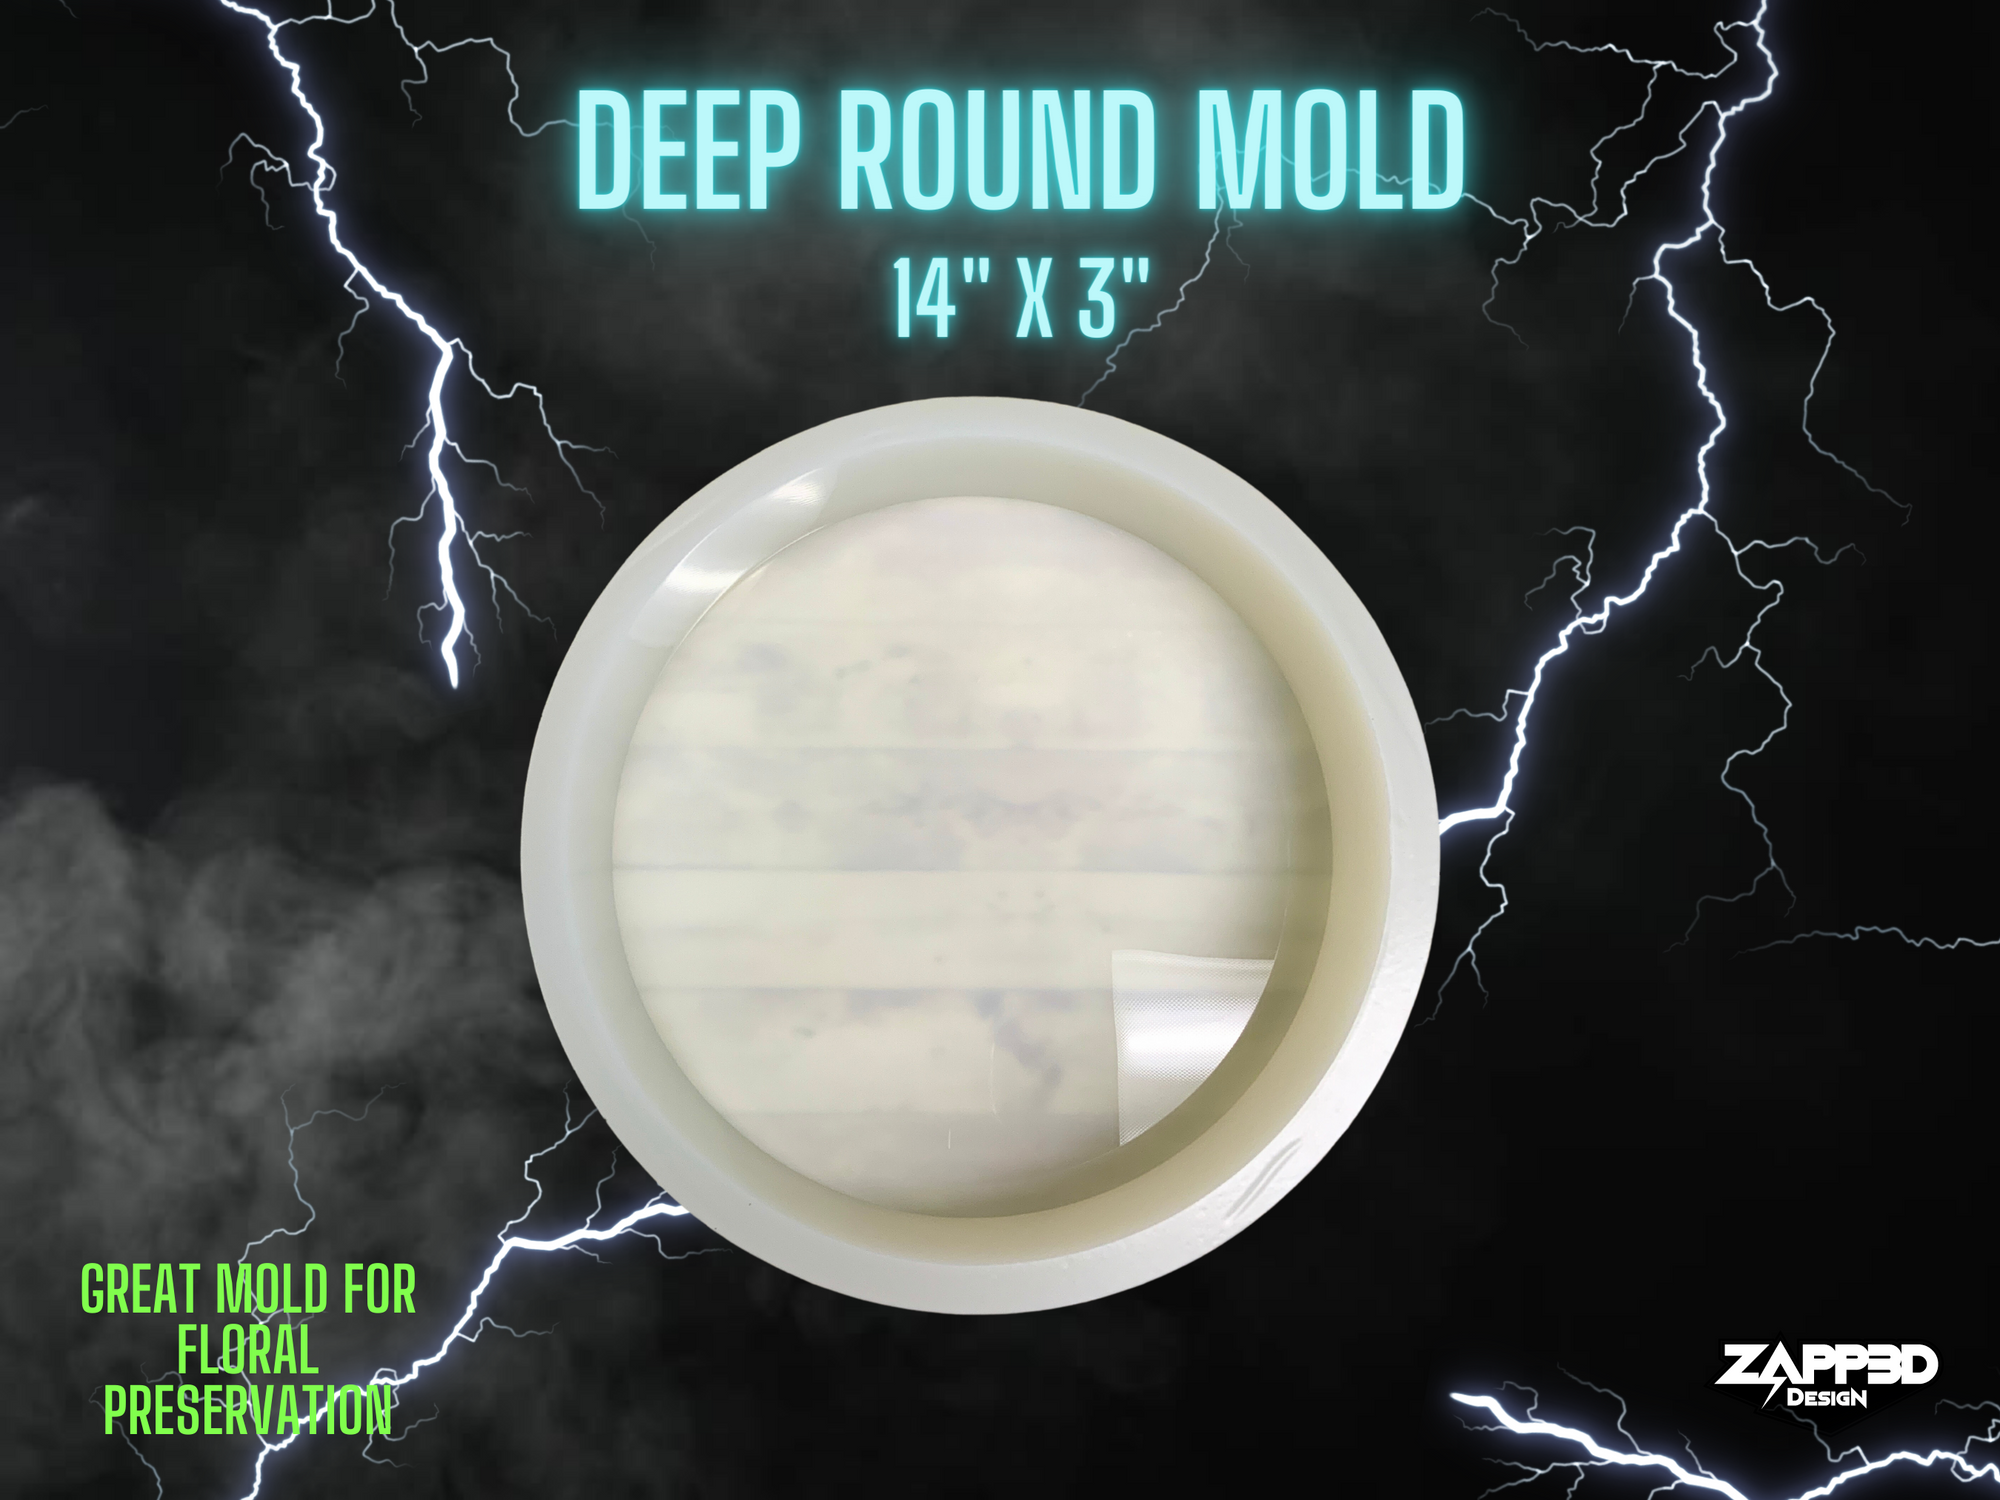 Deep Round Mold | 14" x3" | ULTRA QUALITY | Table Mold, Round Mold, Floral Preservation Mold, Deep Circle Mold, 14" Round Mold